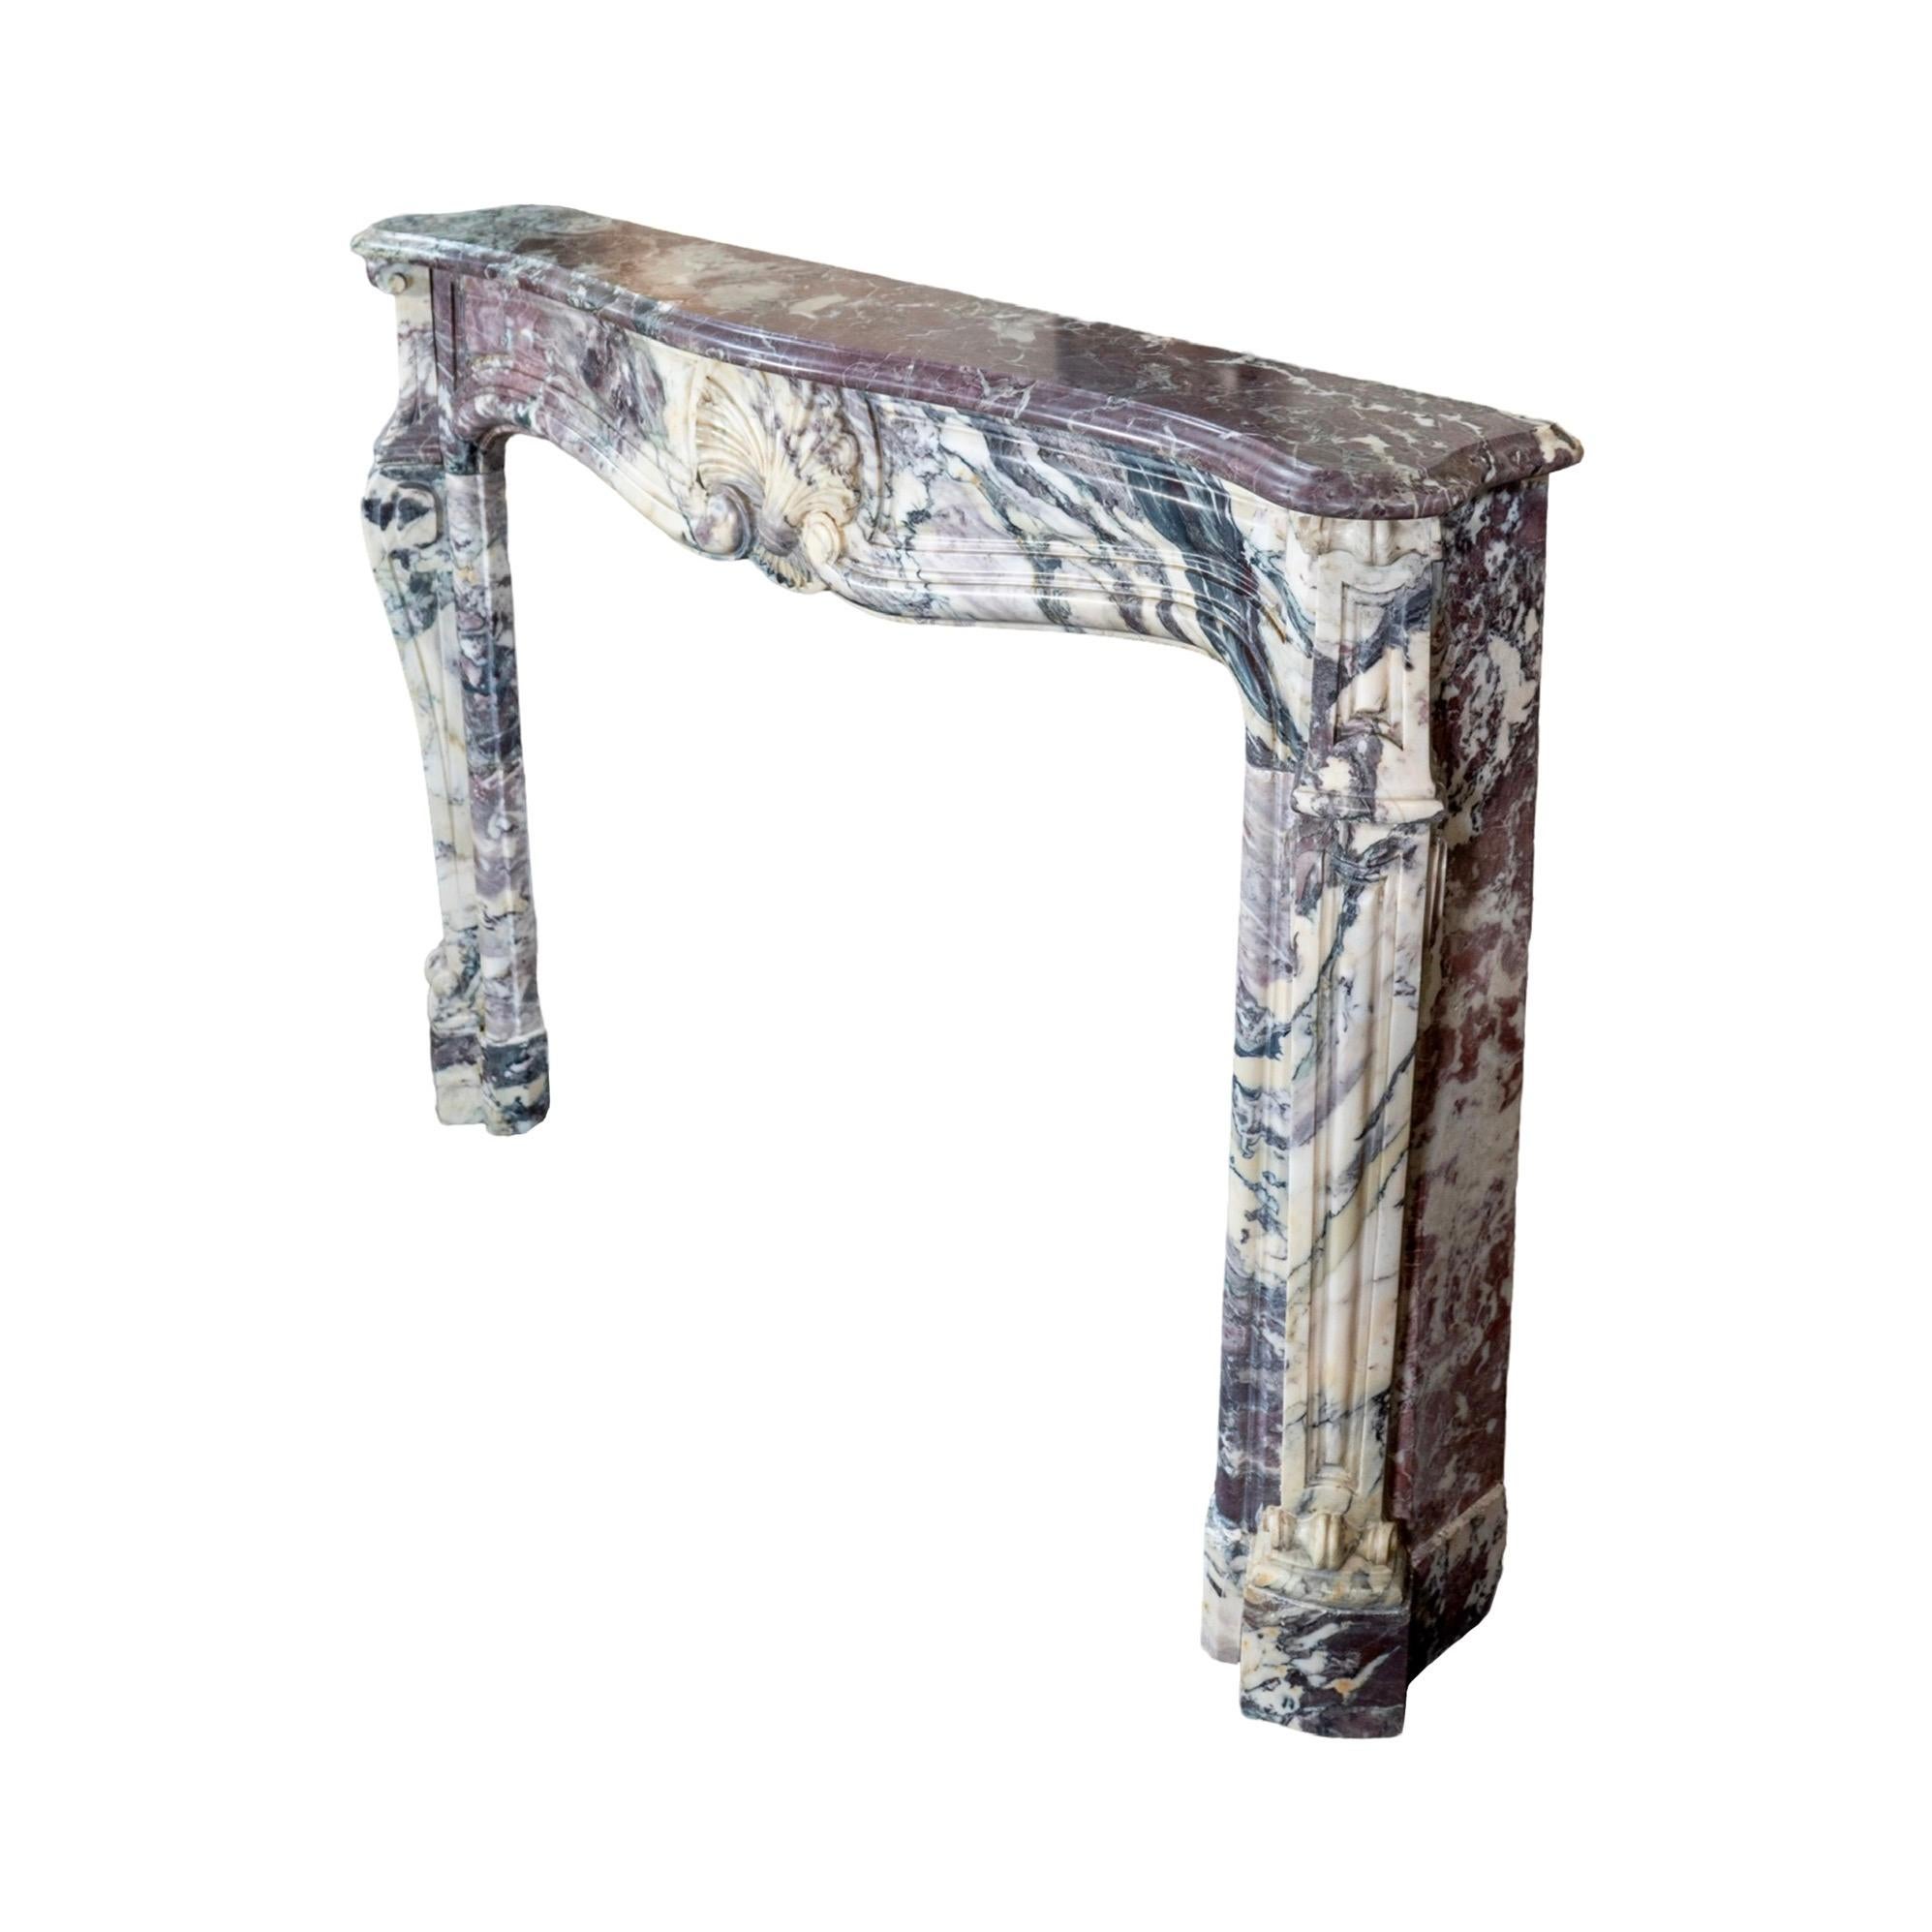 French Villefranche Peach Flower Marble Mantel For Sale 3